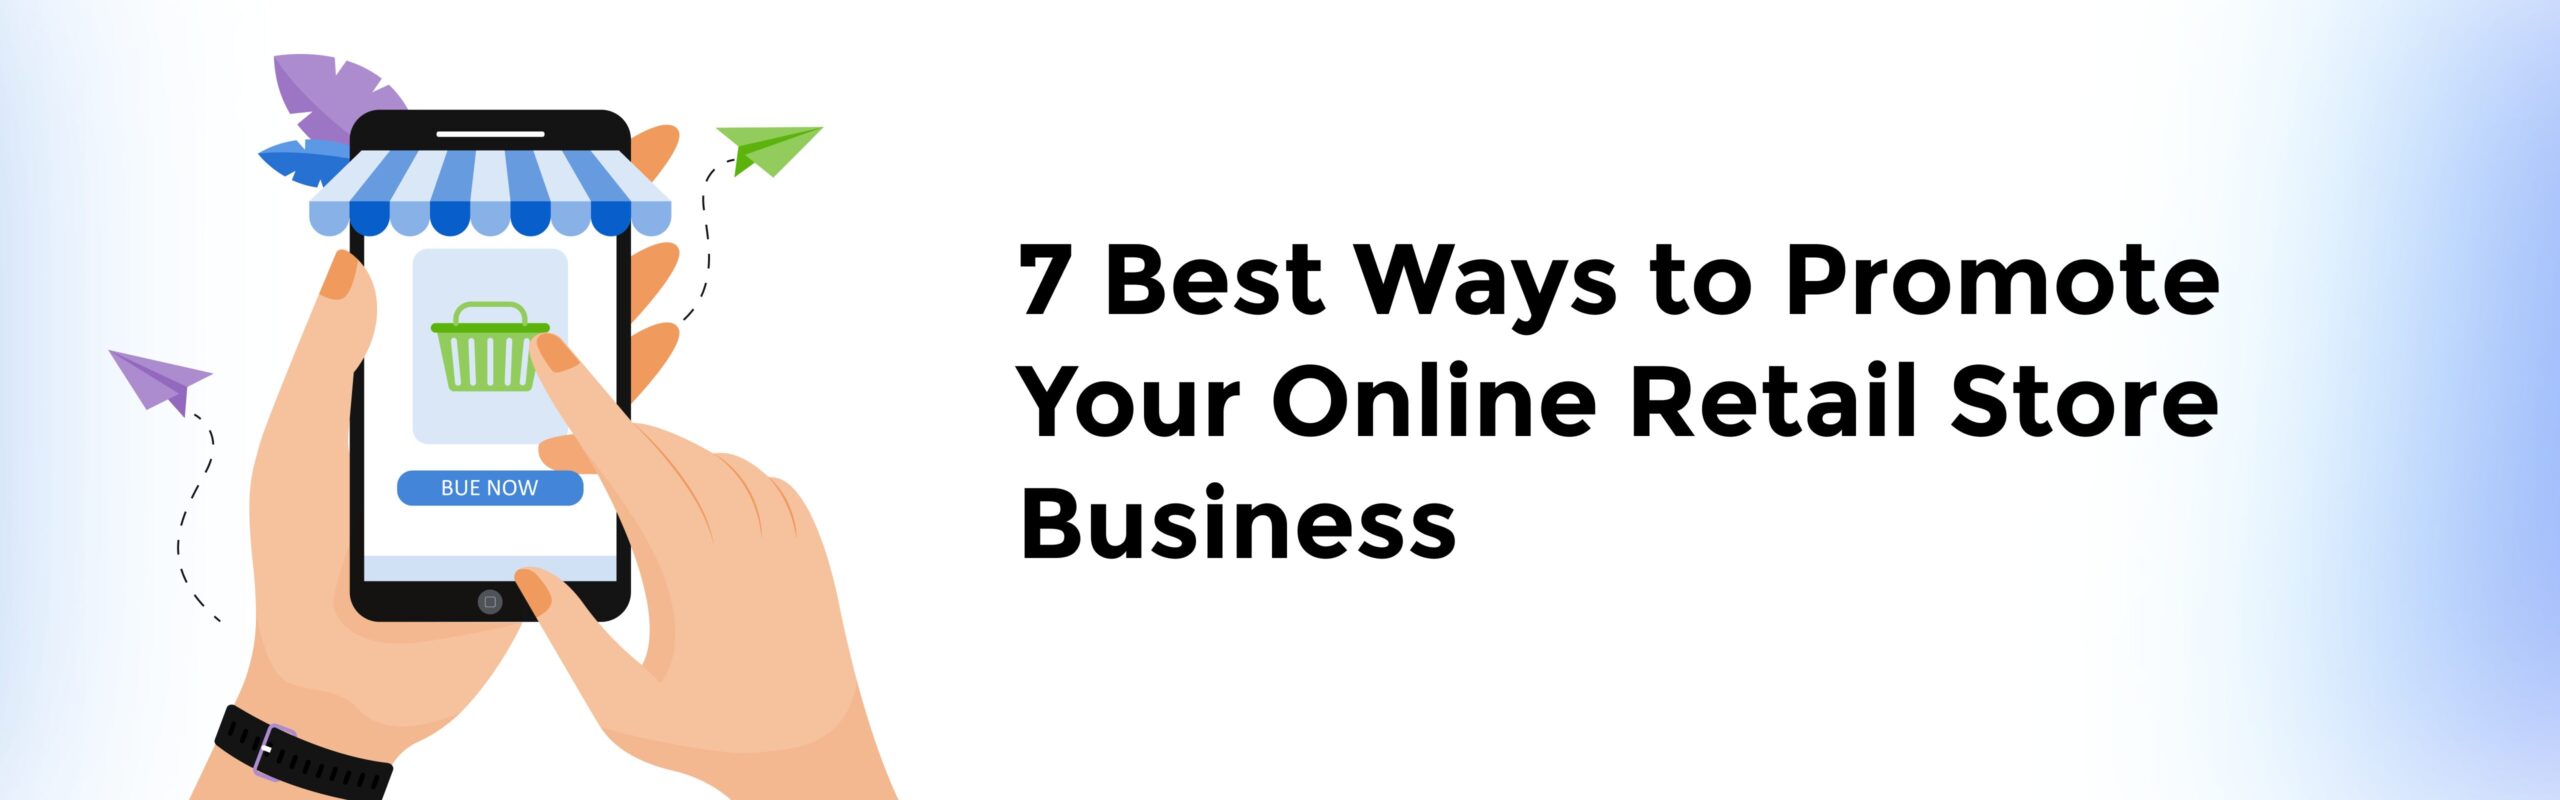 Top Ways To Promote Your Business Online